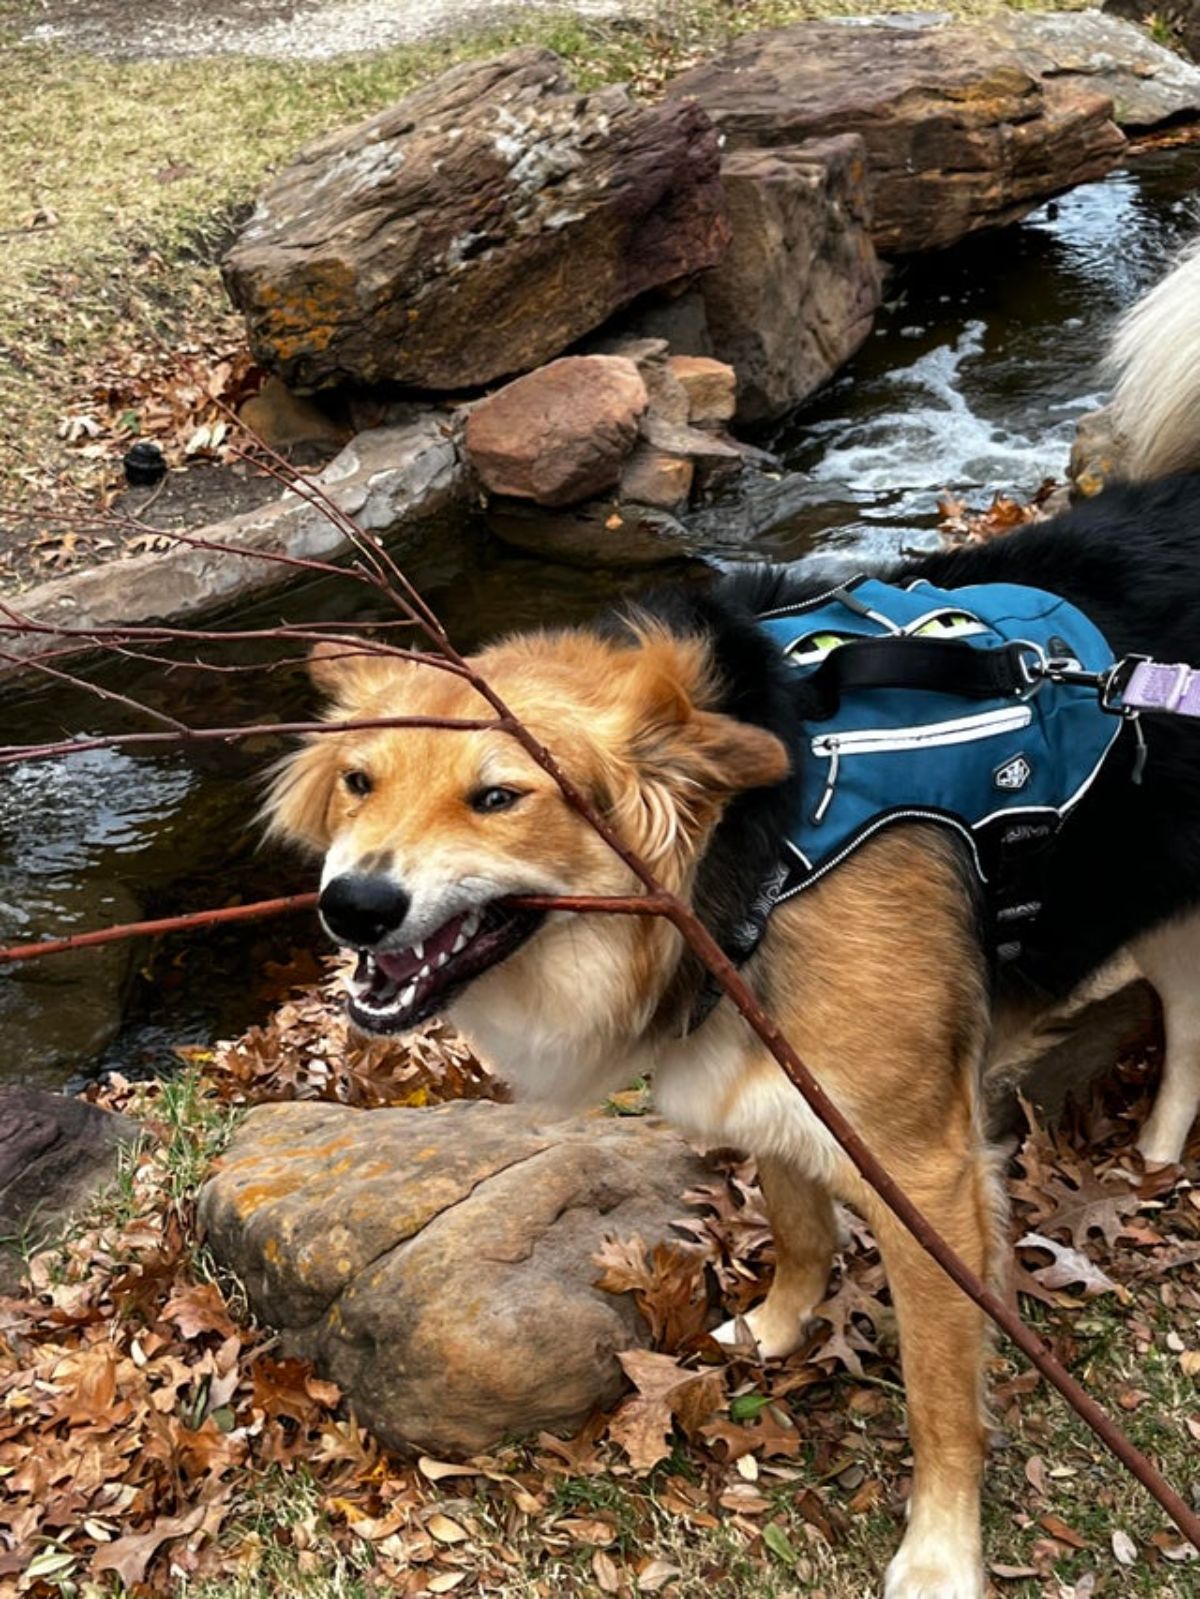 brown fluffy dog by a creek wearing a blue harness holding a branch